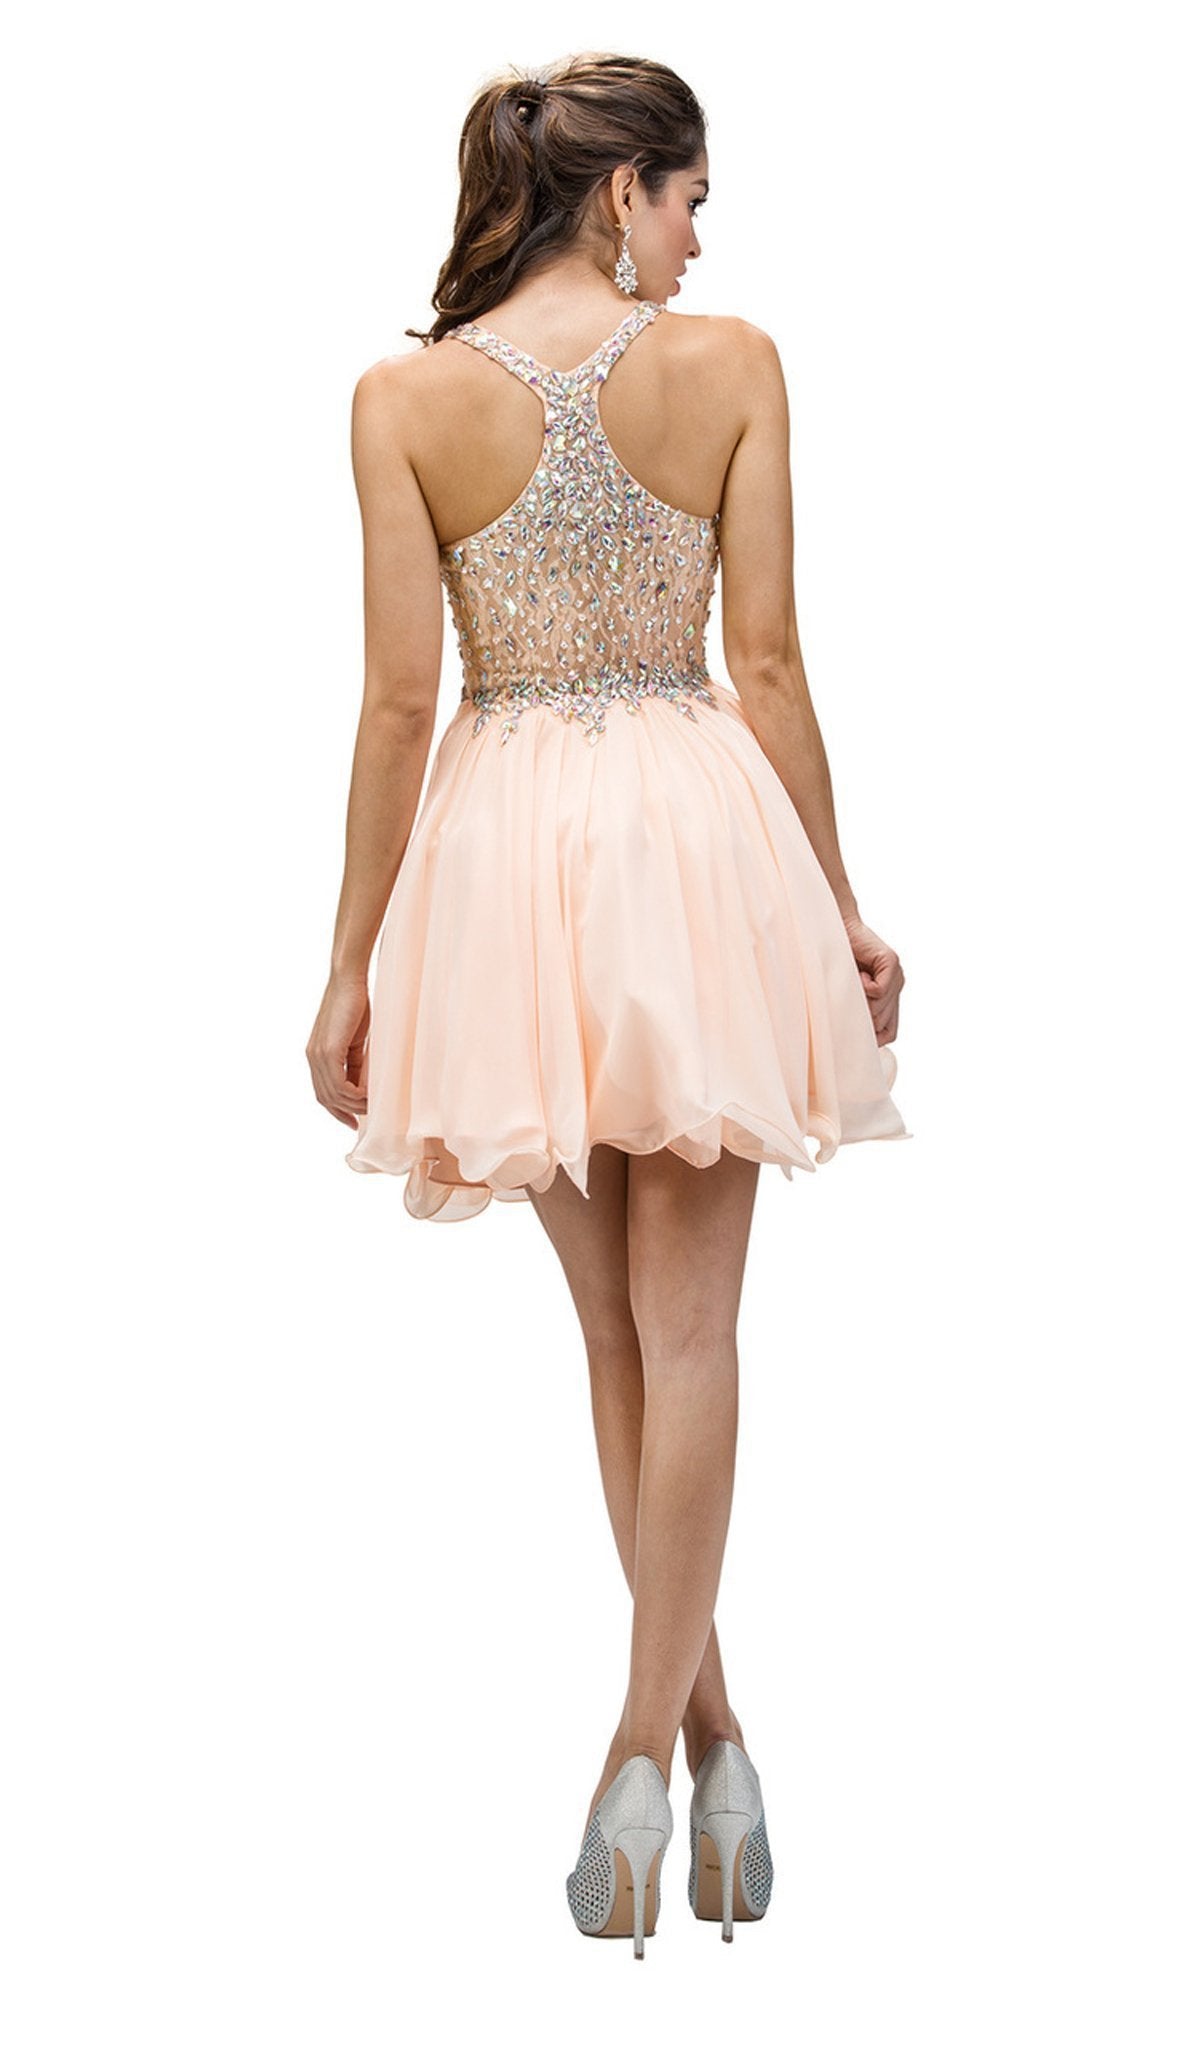 Dancing Queen - 8997 Crystal Beaded V-Neck Chiffon Prom Dress Special Occasion Dress